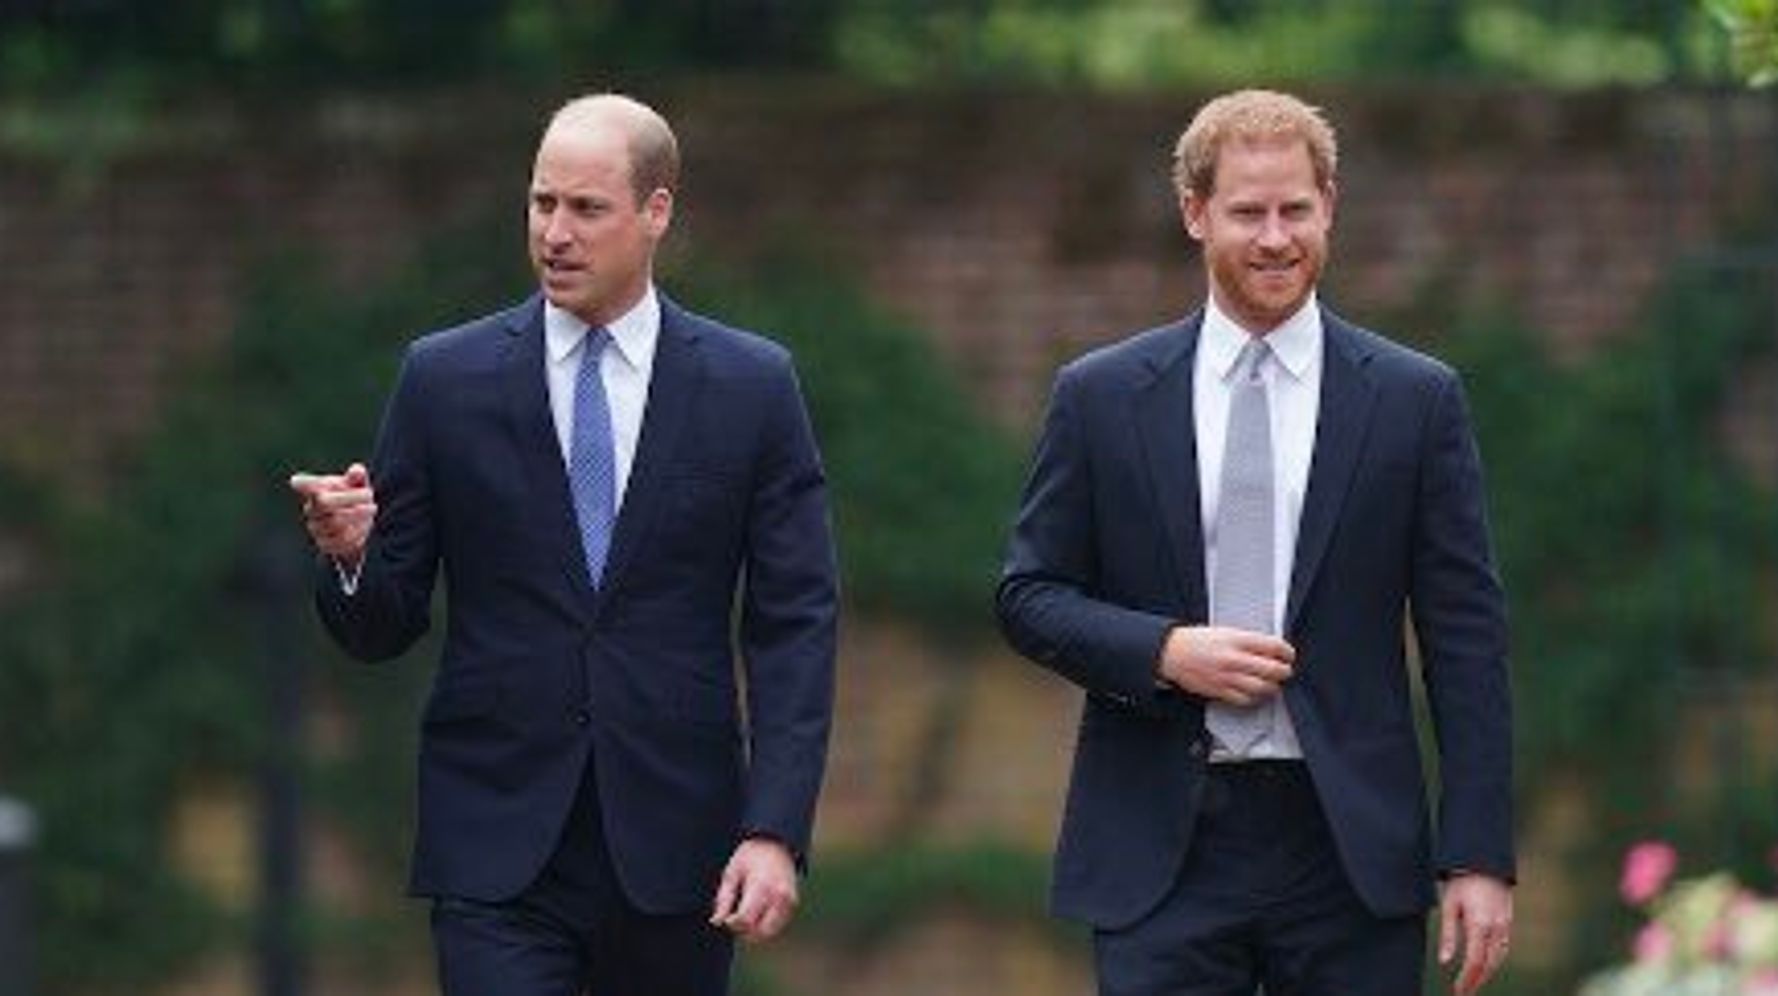 Princes William And Harry Reunite To Unveil Statue In Honor Of Diana’s Legacy